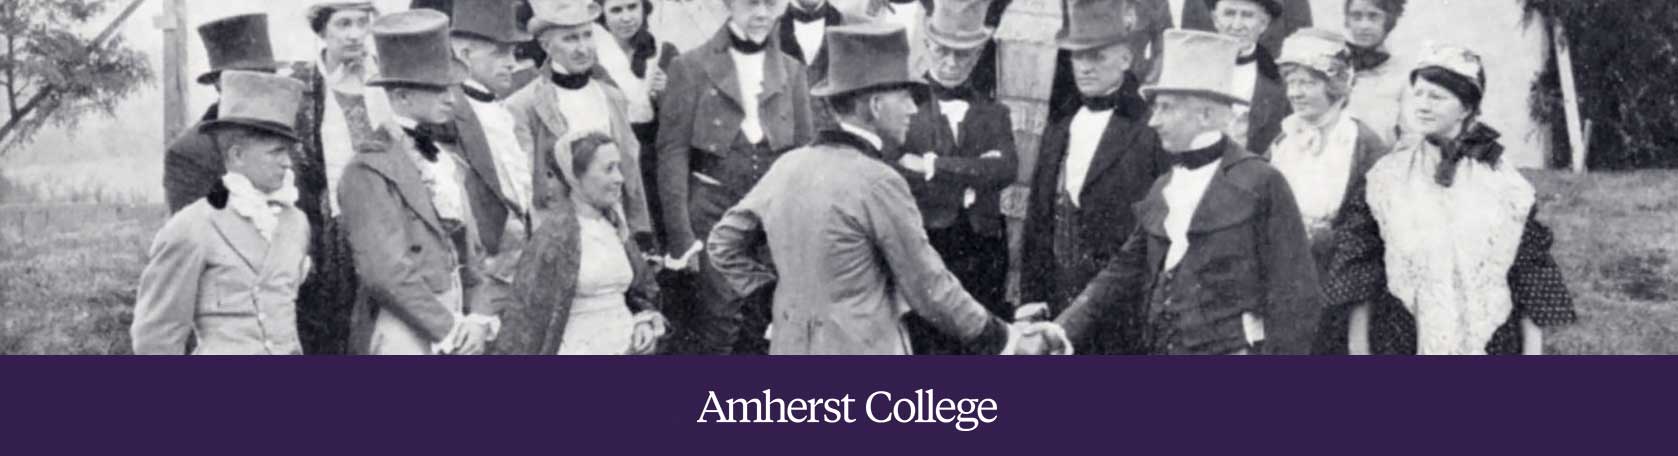 Men and women shaking hands in 1821 agreeing to the founding of Amherst College